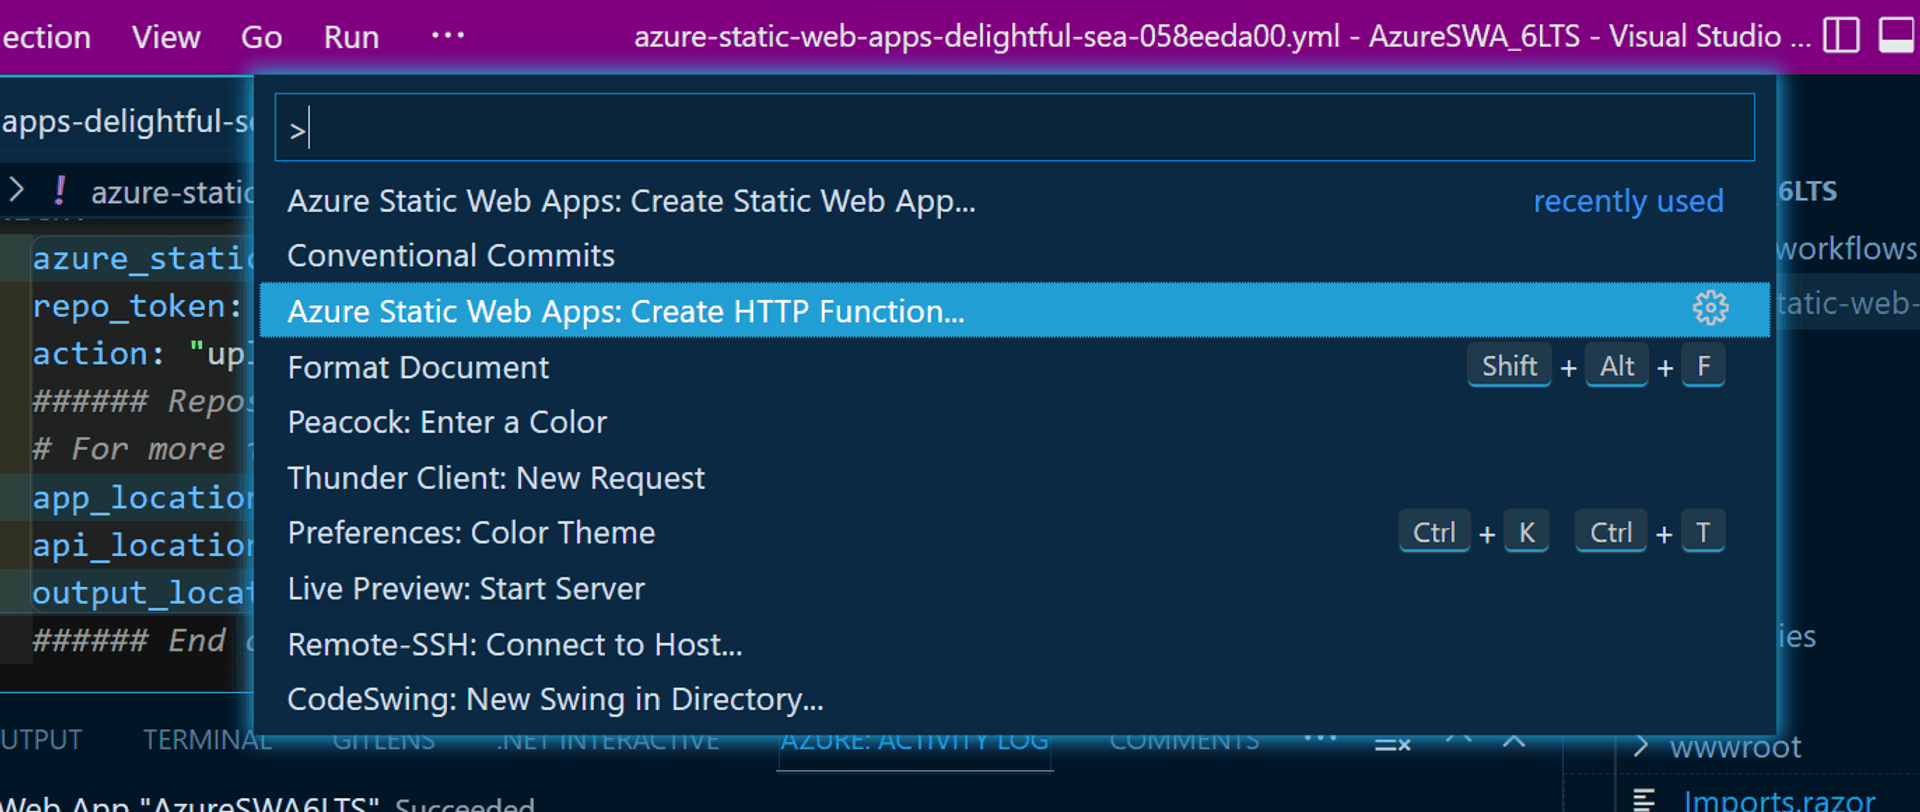 VS Code extension command palette expanded with the Create API command in the middle of the list